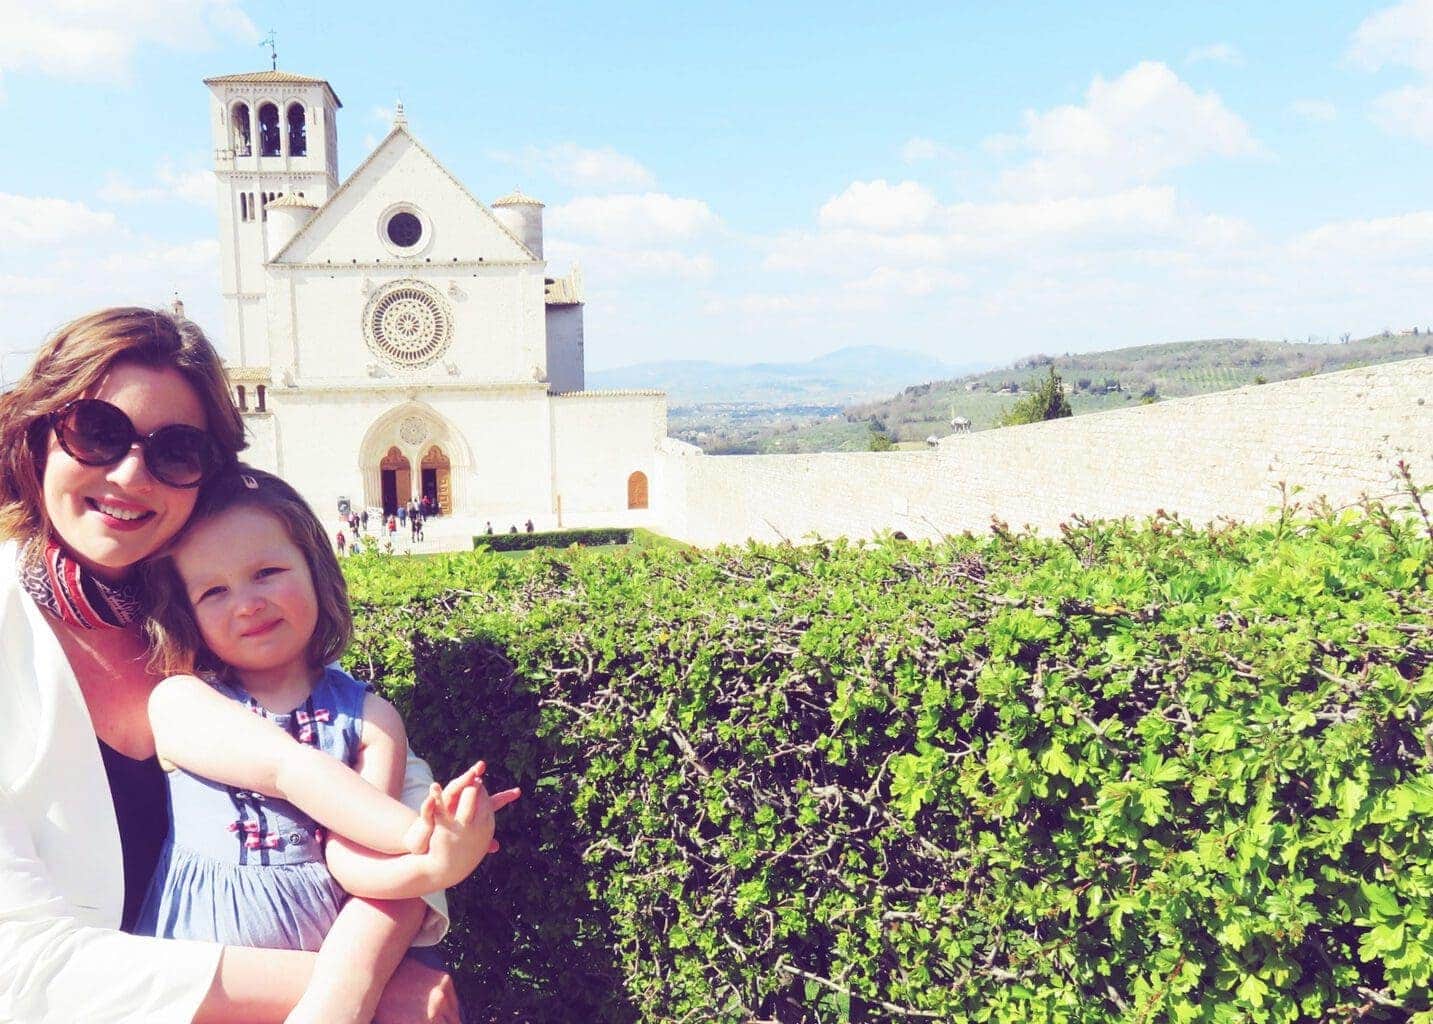 A SERENE FAMILY HOLIDAY IN UMBRIA, ITALY